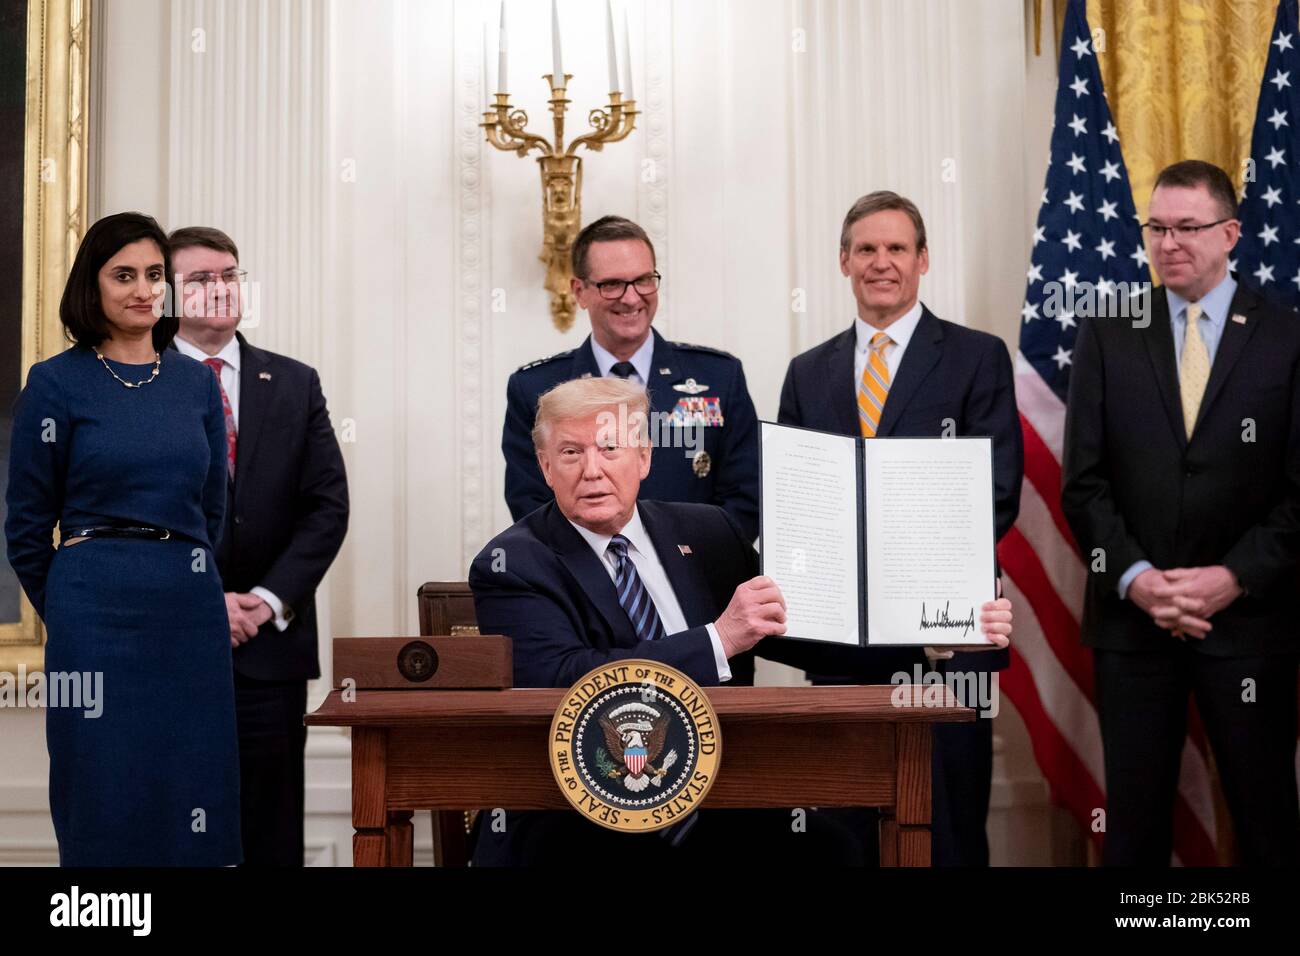 Washington, United States Of America. 30th Apr, 2020. Washington, United States of America. 30 April, 2020. U.S. President Donald Trump, holds up a signed proclamation making the month of May Older Americans Month, during the protecting American Seniors event in the East Room of the White House April 30, 2020 in Washington, DC. Credit: Tia Dufour/White House Photo/Alamy Live News Stock Photo